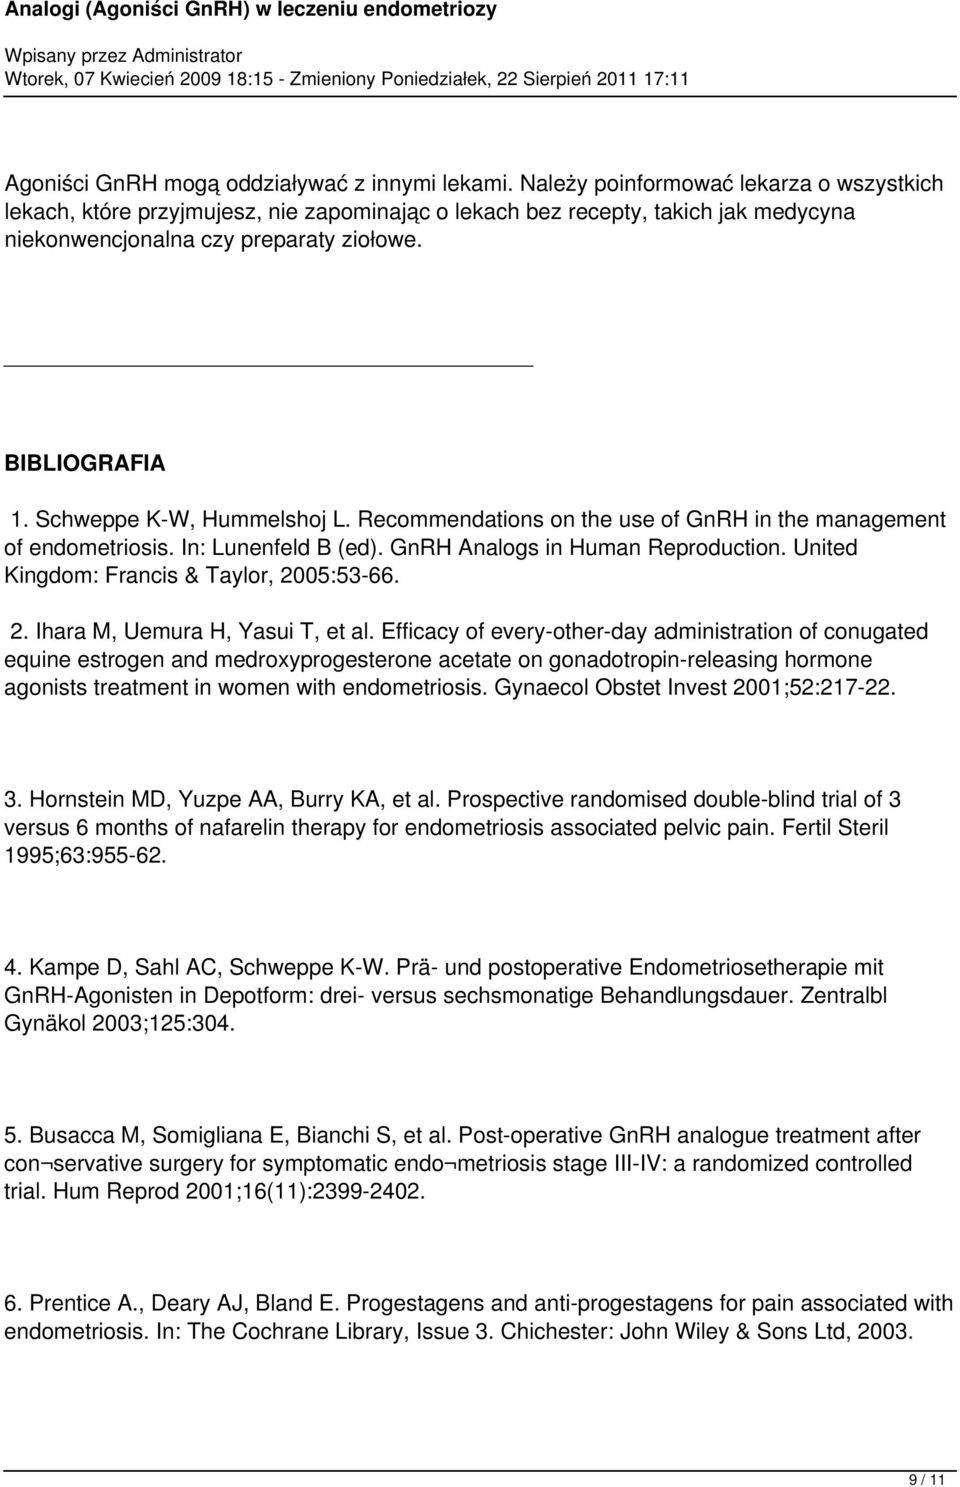 Schweppe K-W, Hummelshoj L. Recommendations on the use of GnRH in the management of endometriosis. In: Lunenfeld B (ed). GnRH Analogs in Human Reproduction.